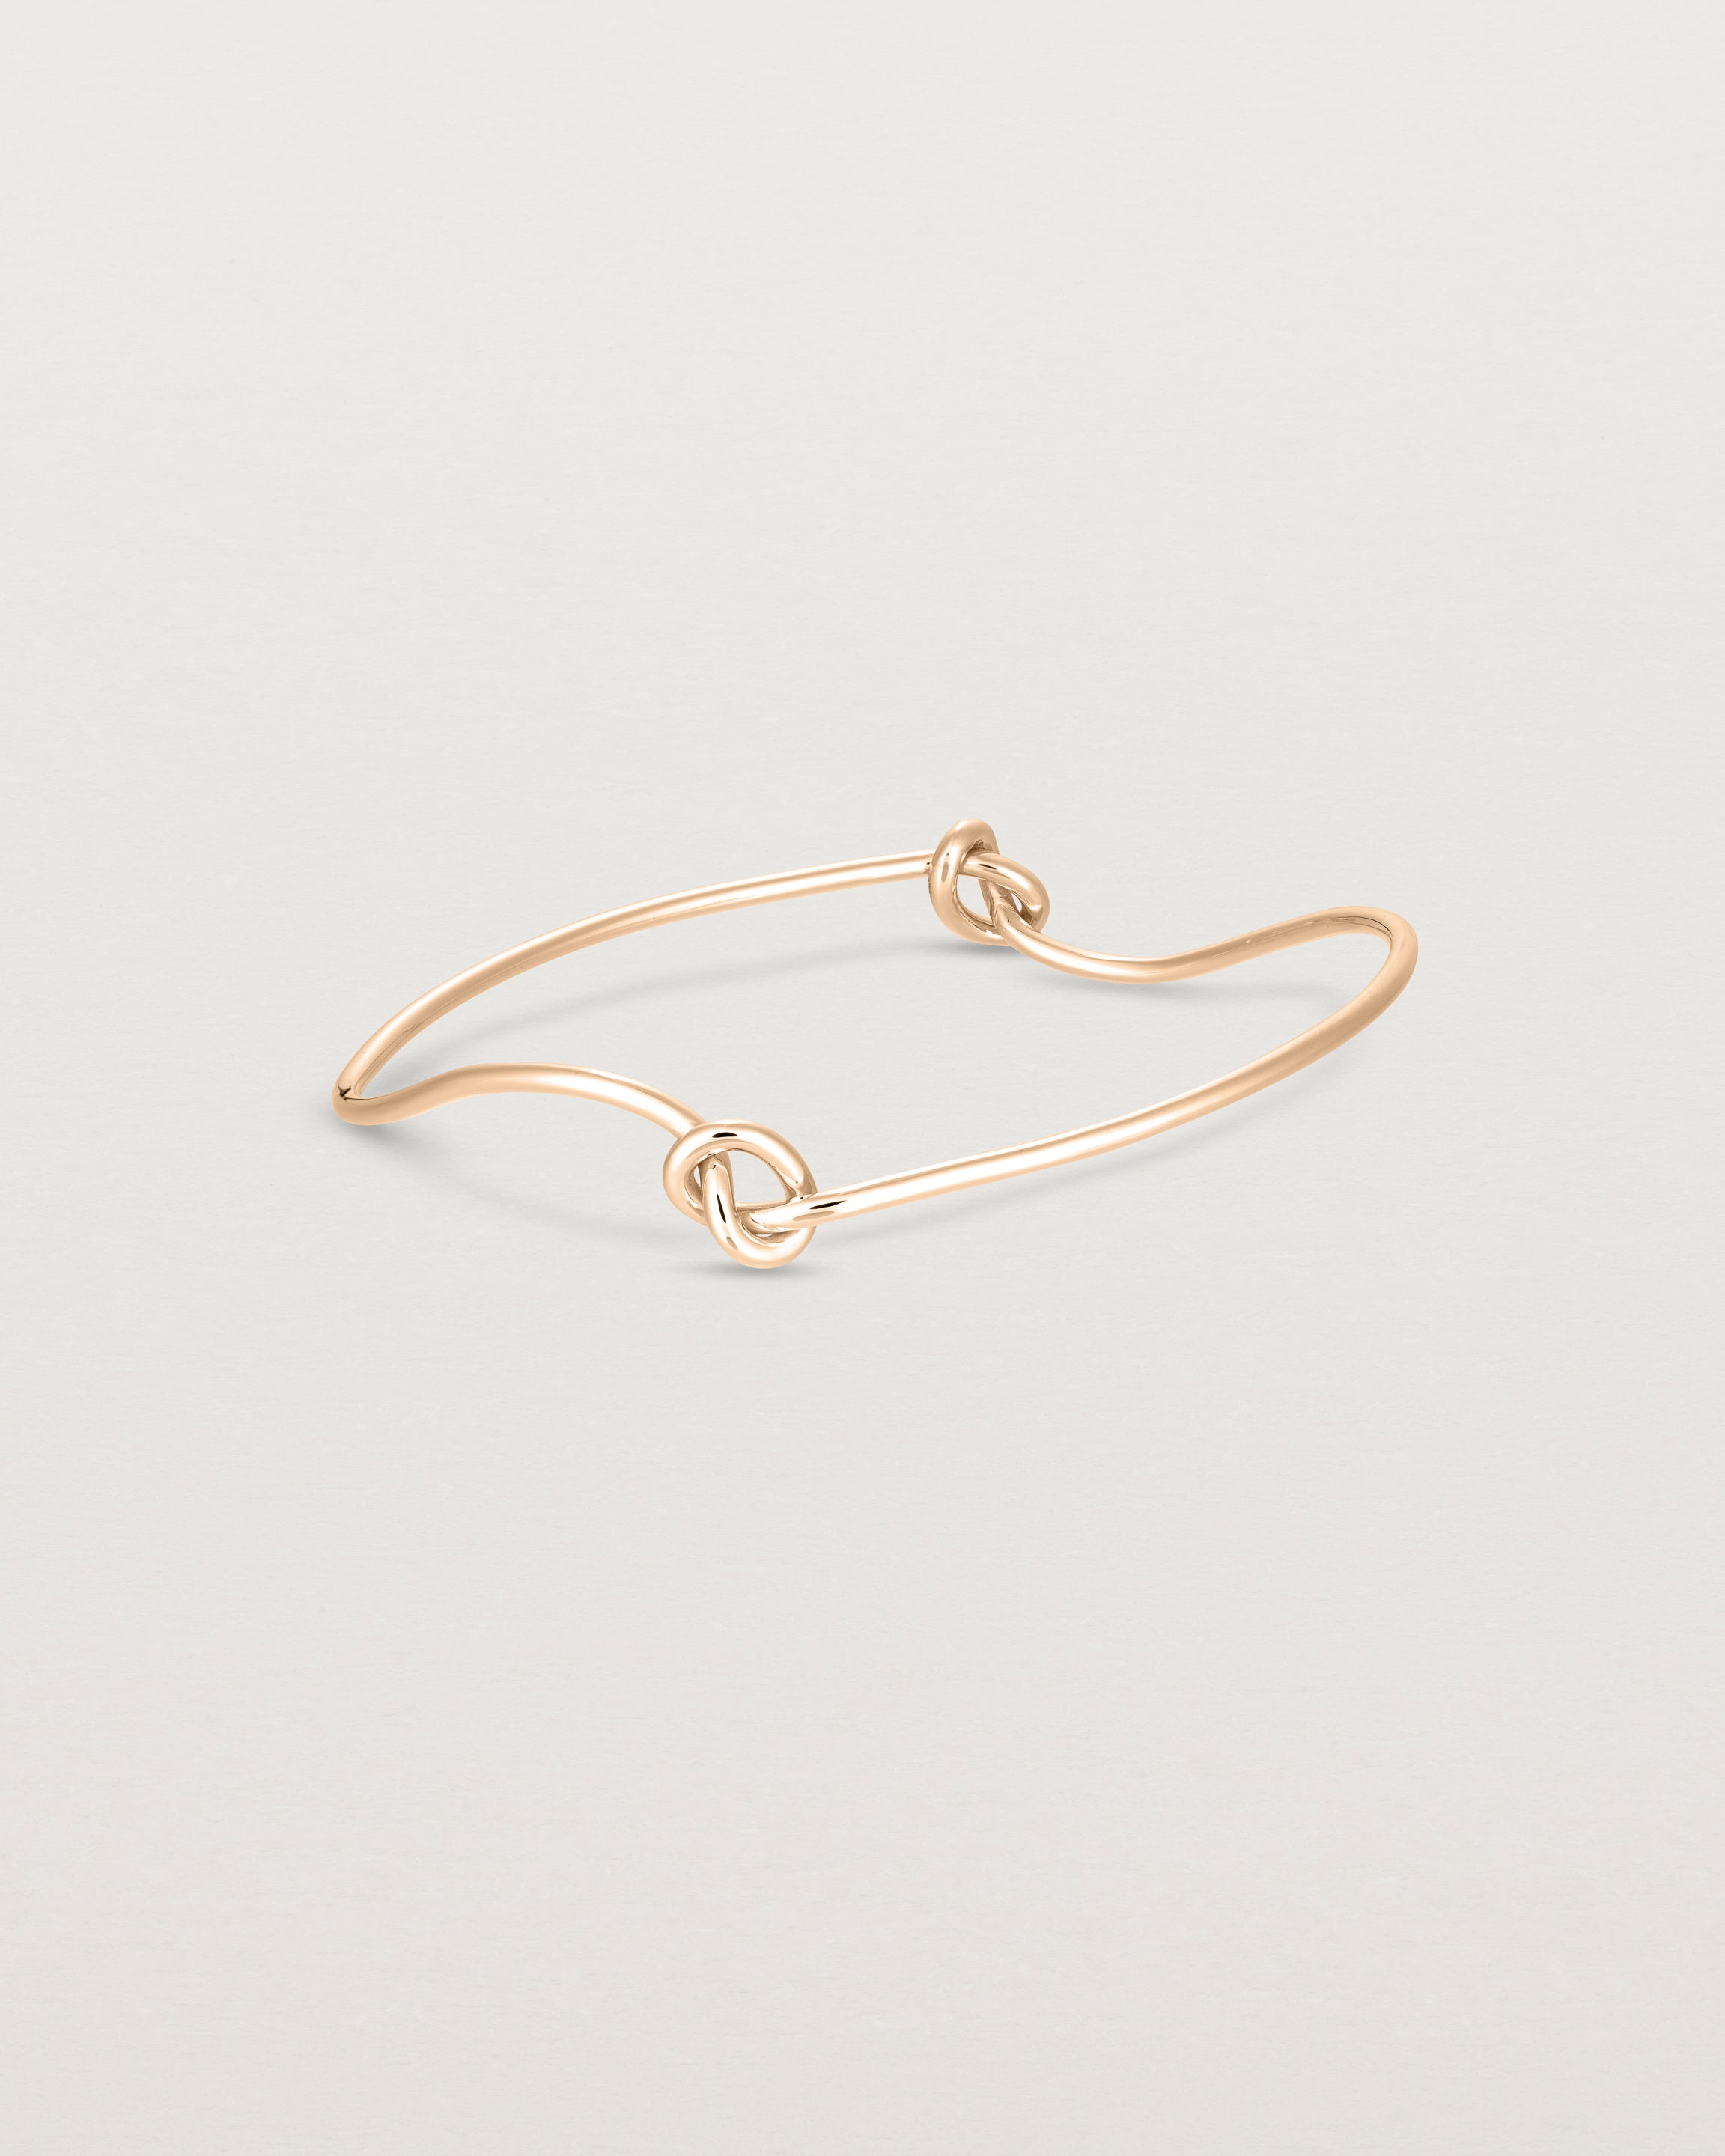 Front view of the Dà anam Bangle in rose gold.